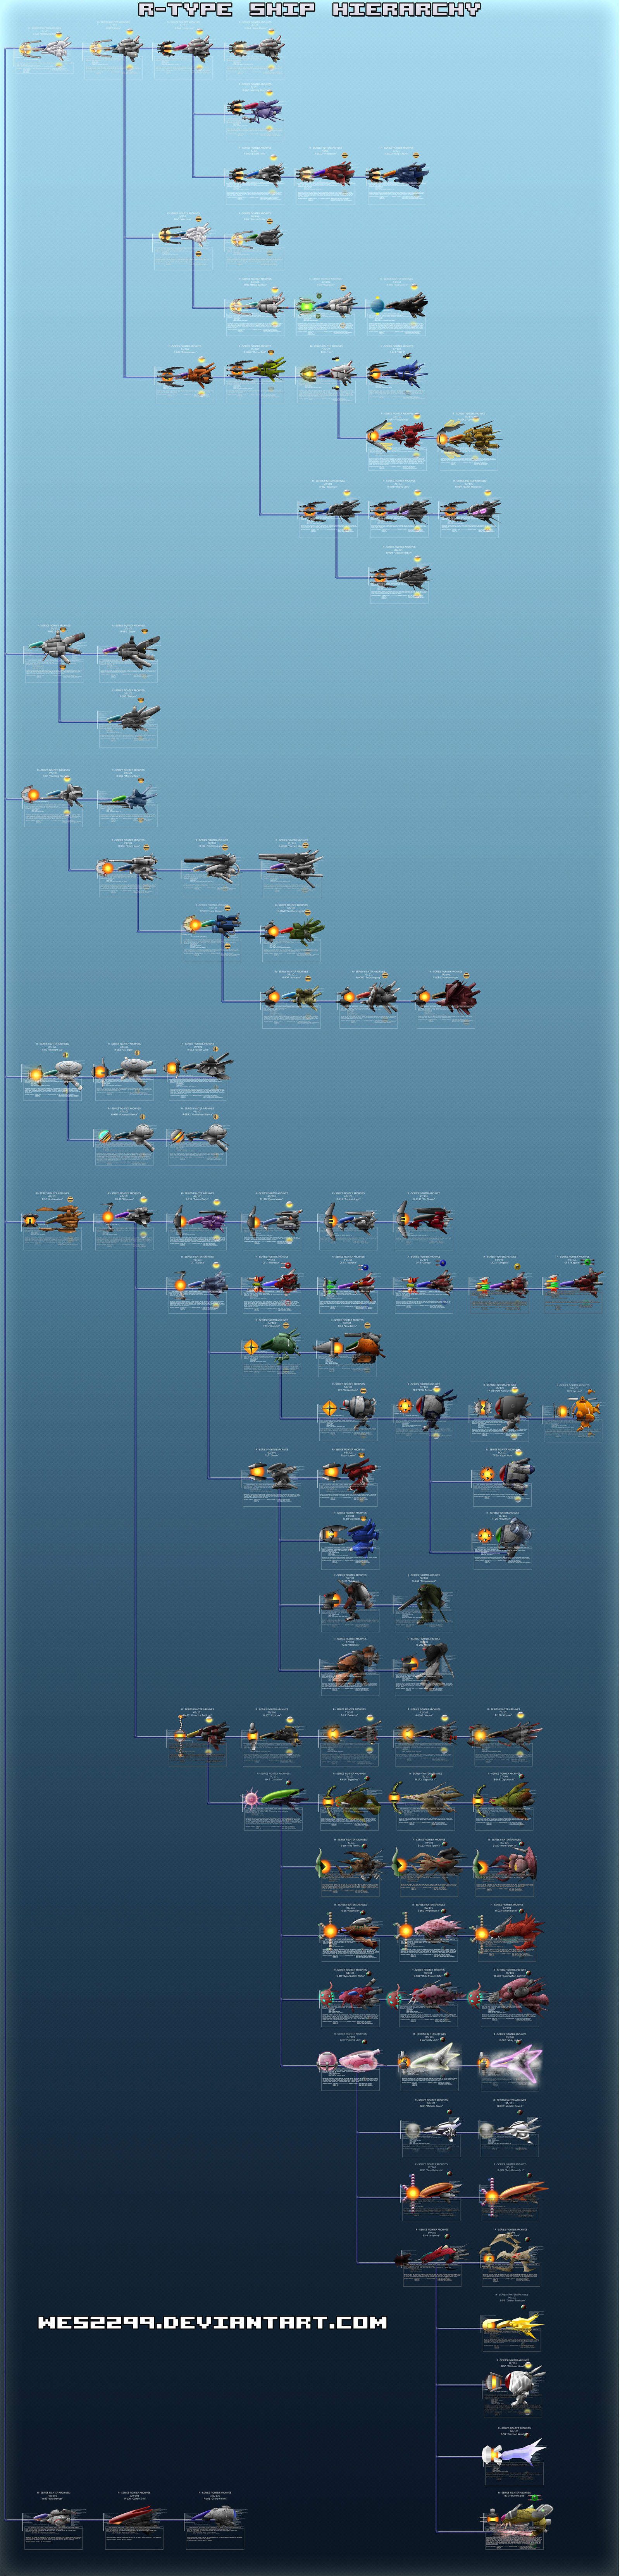 r_type_ship_hierarchy_by_wes2299-d23ve34.jpg